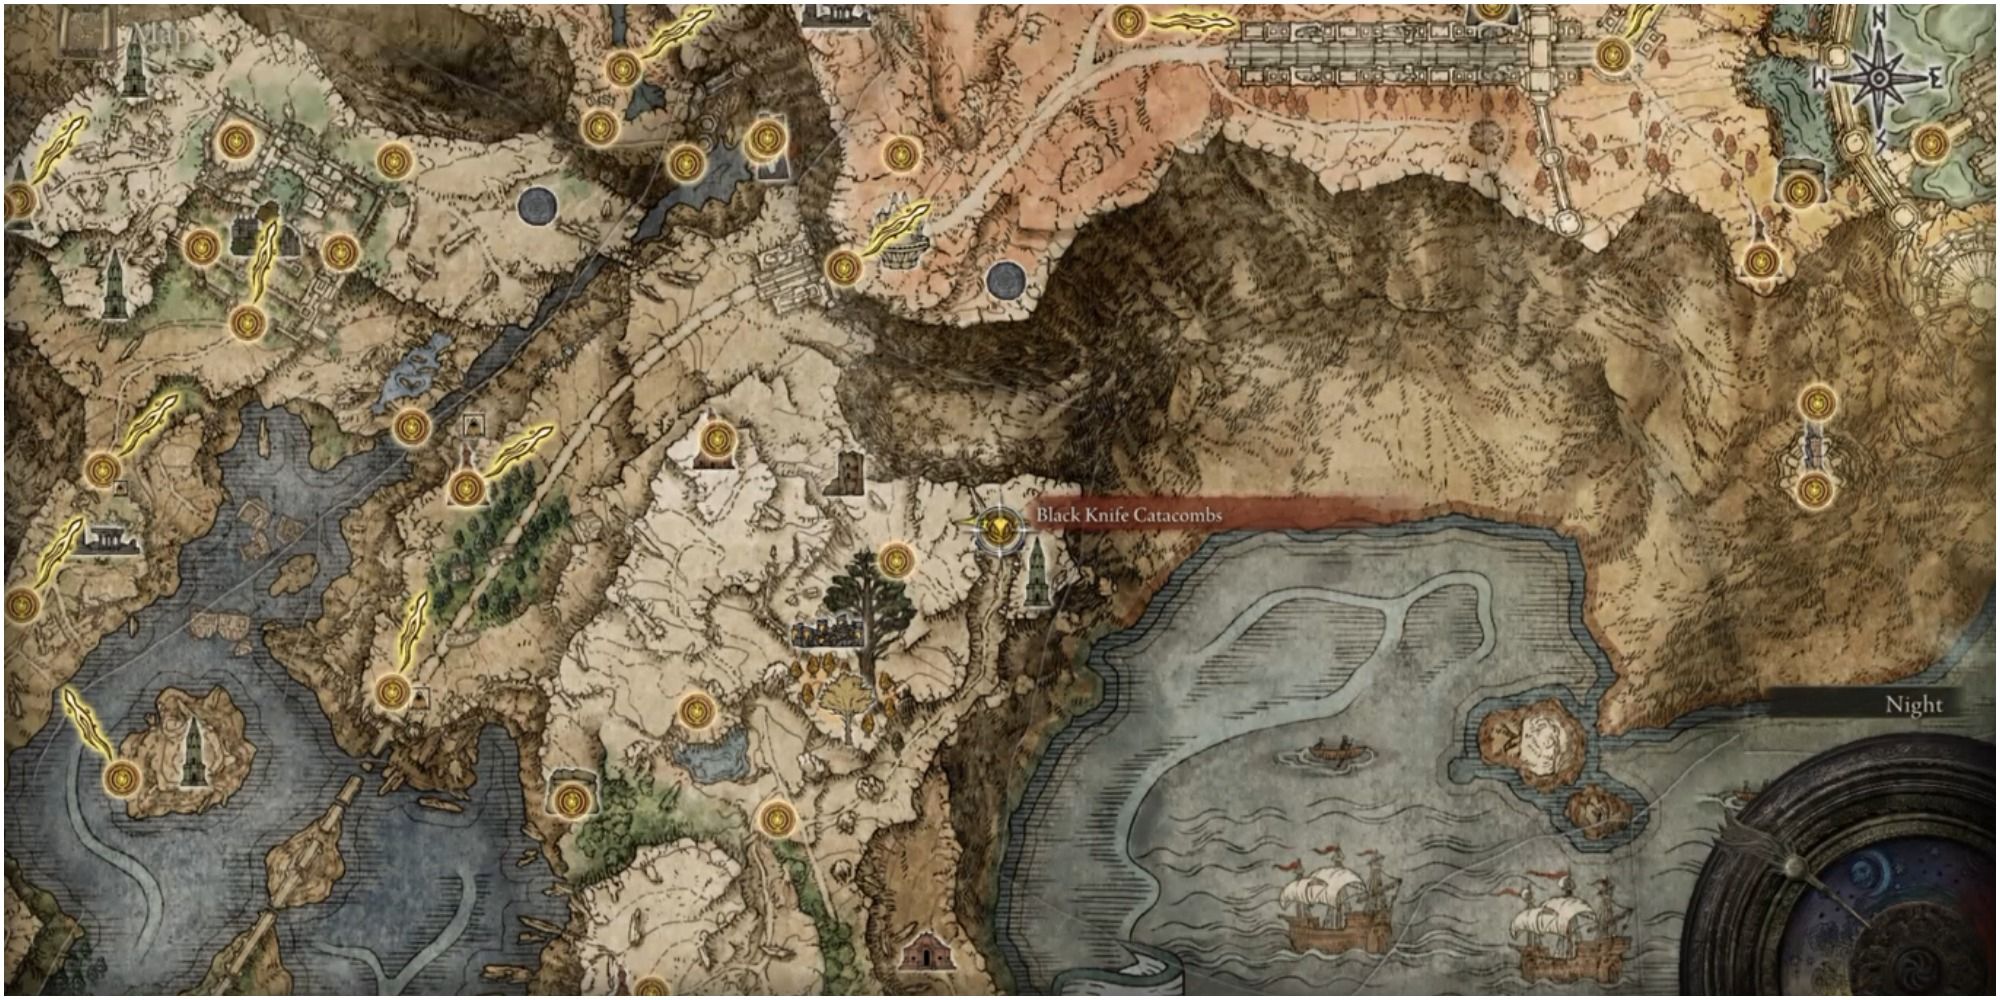 The map showing the location of Black Knife Catacombs in Liurnia.